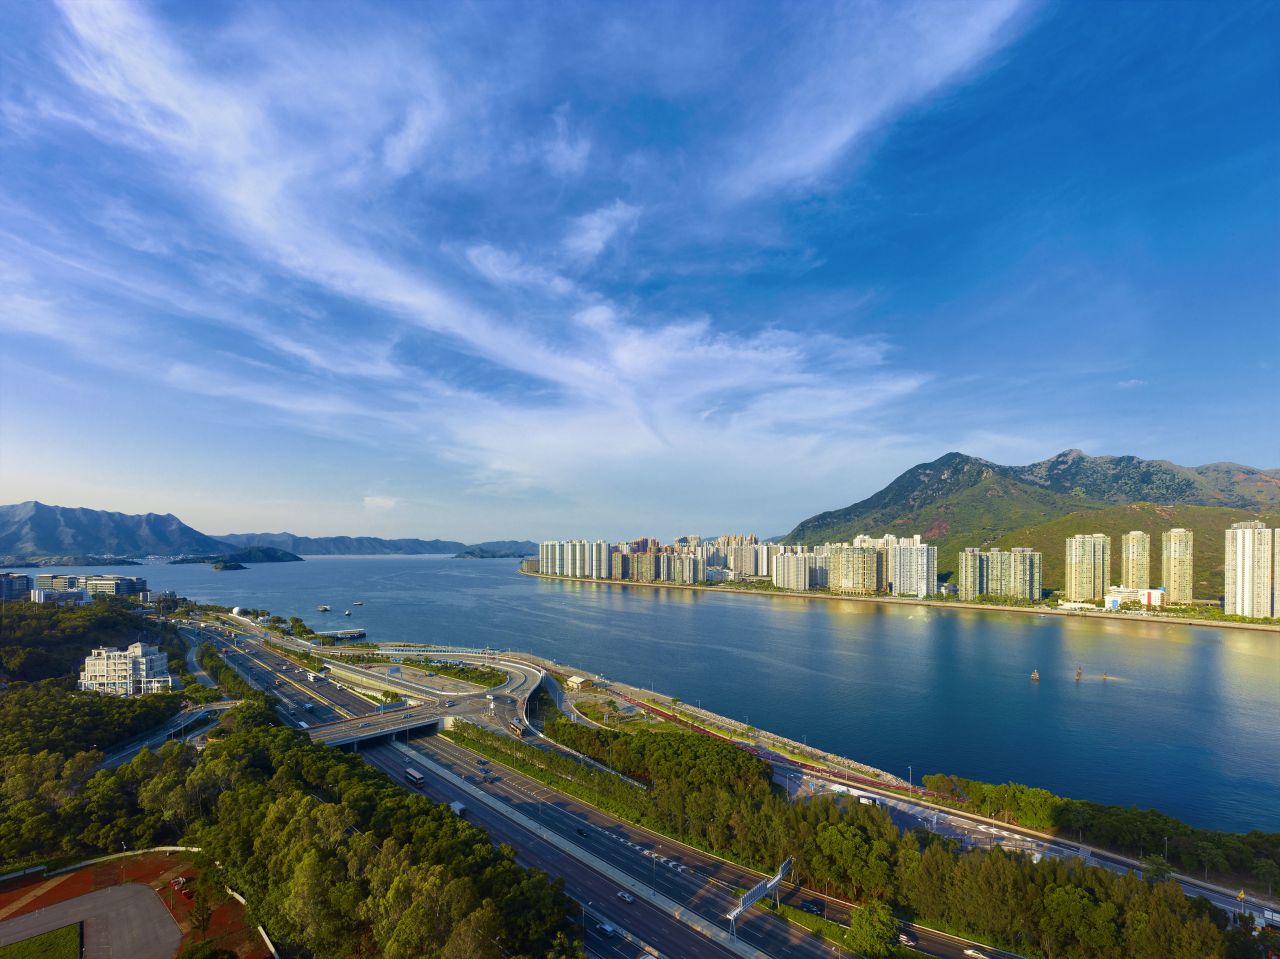 Not the HK view you were expecting? Adjacent to The Chinese University of Hong Kong, the Hyatt Sha Tin offers views of Tolo Harbour and the Kau To Shan mountains.